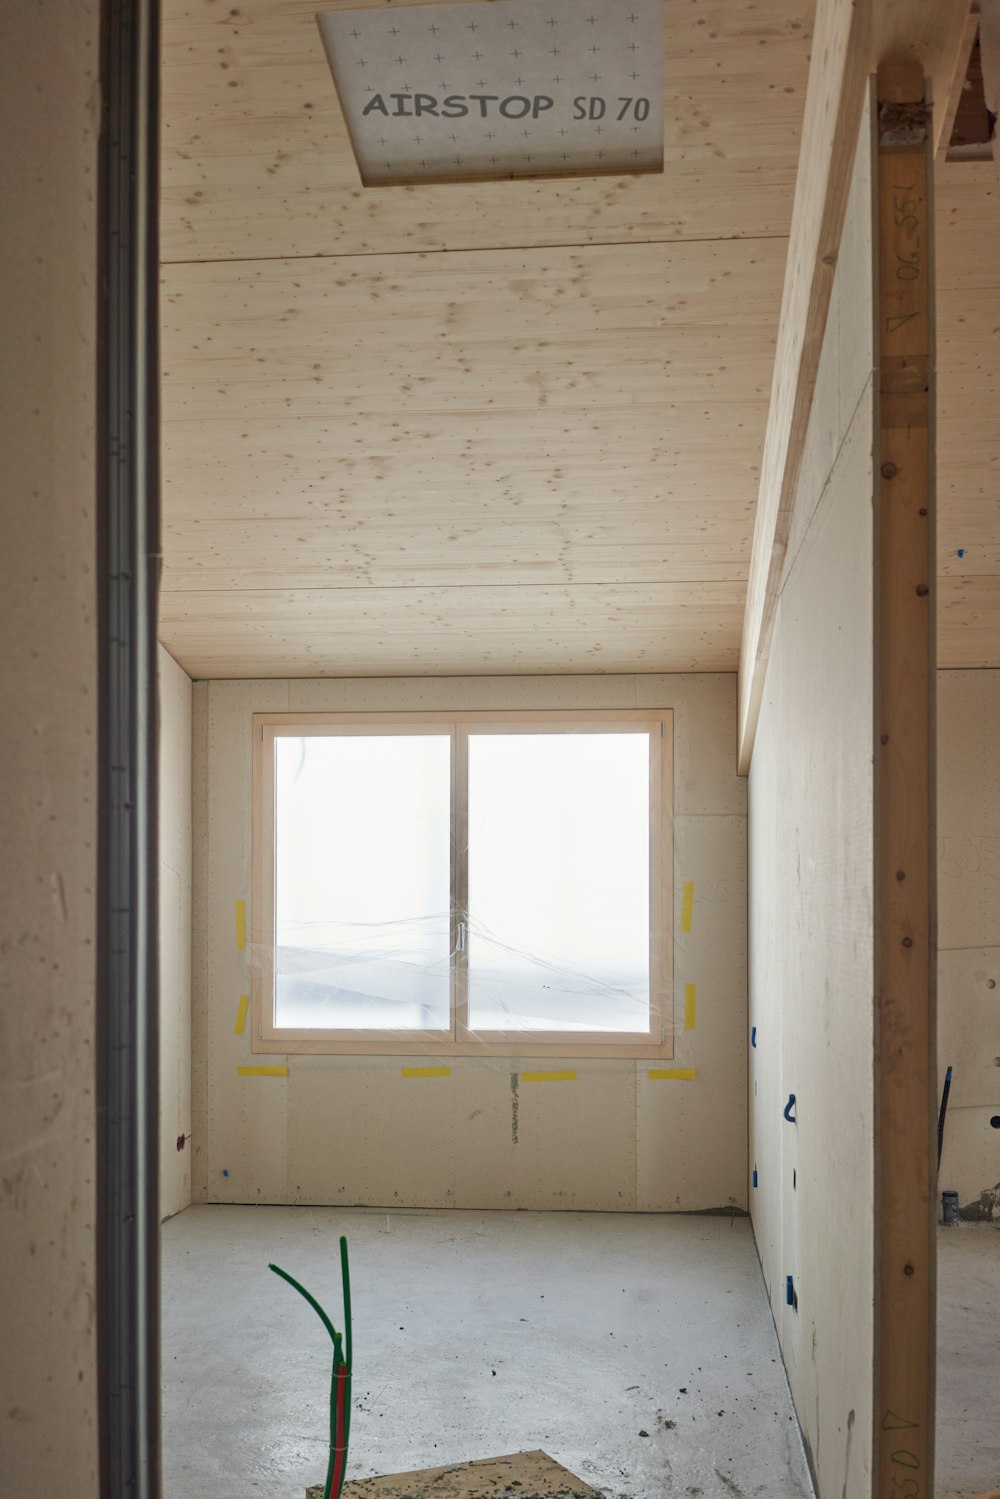 a room that is under construction with a window